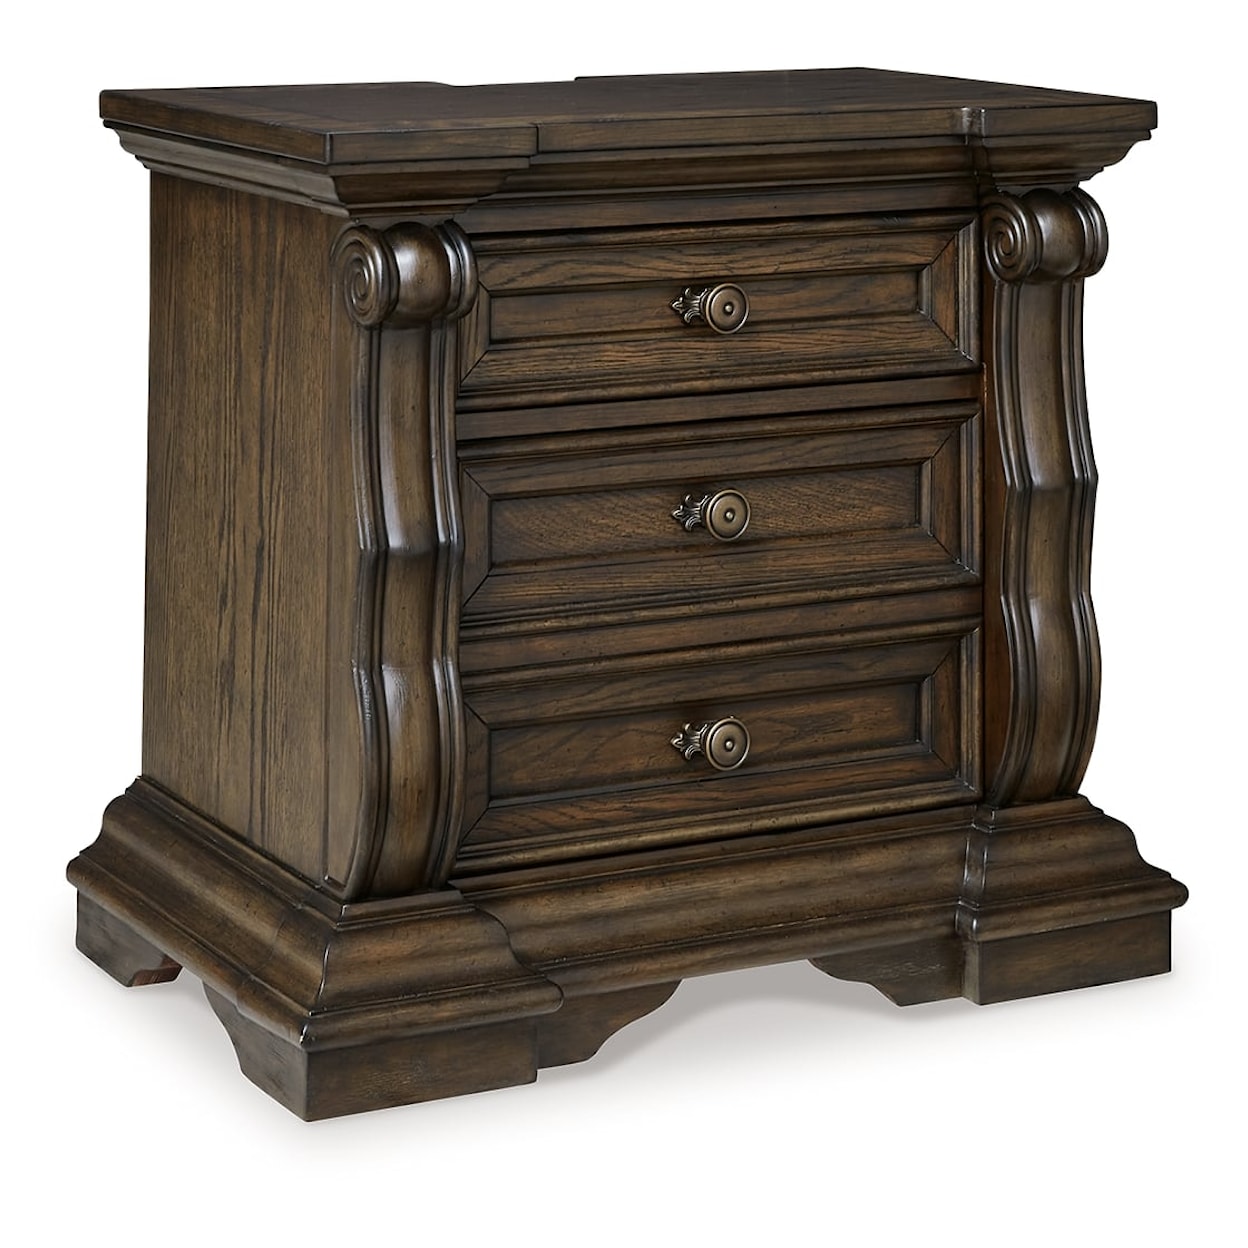 Signature Design by Ashley Maylee 3-Drawer Nightstand